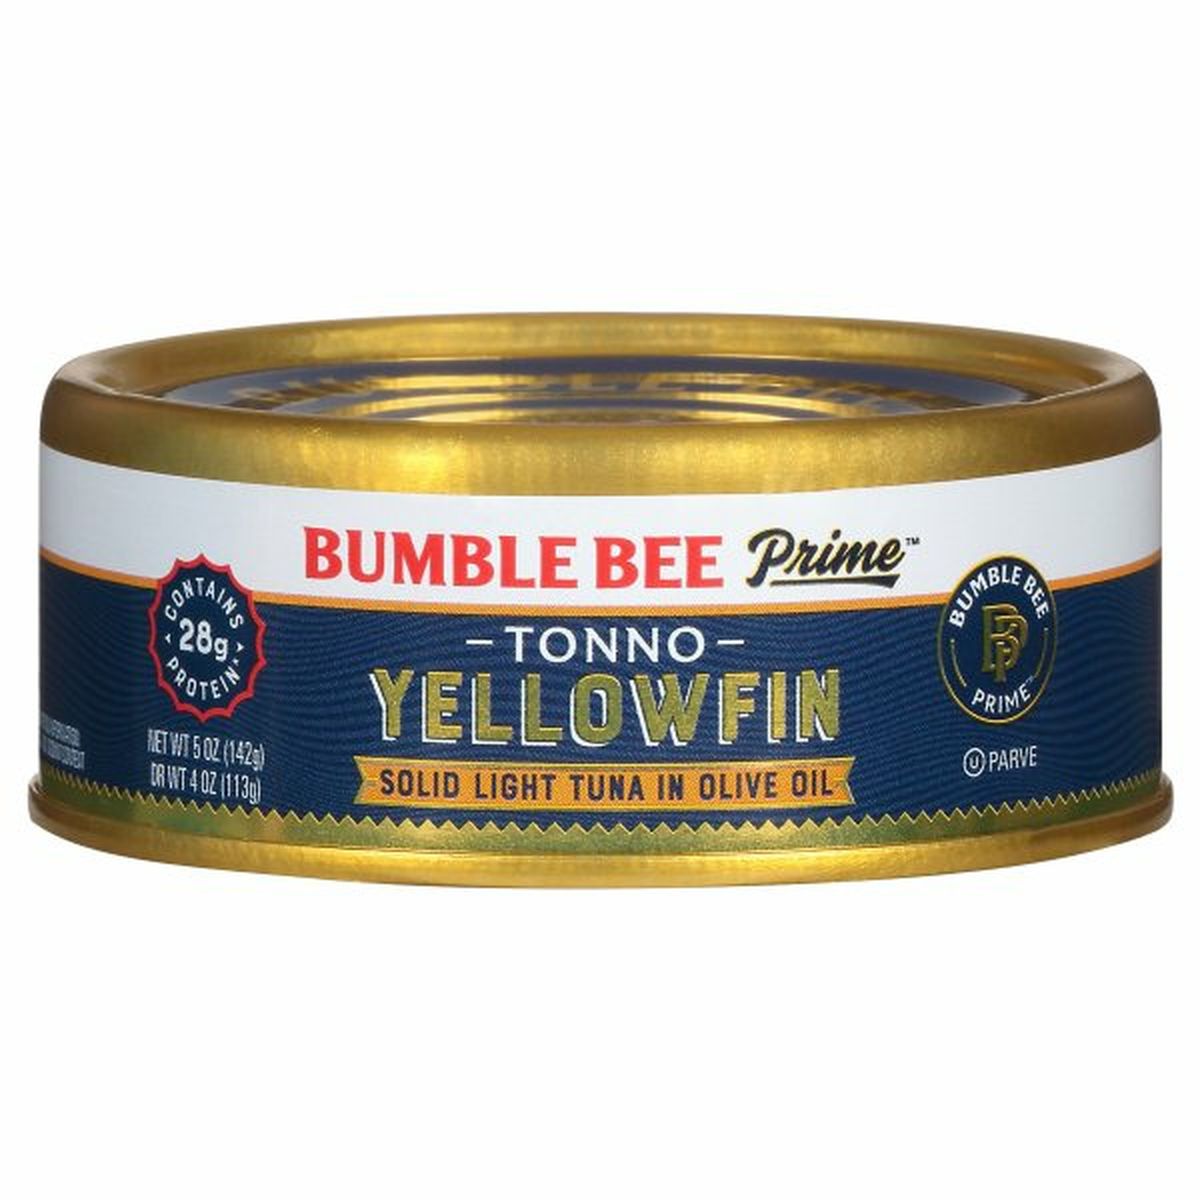 Calories in Bumble Bee Prime Tuna in Olive Oil, Solid Light, Yellowfin